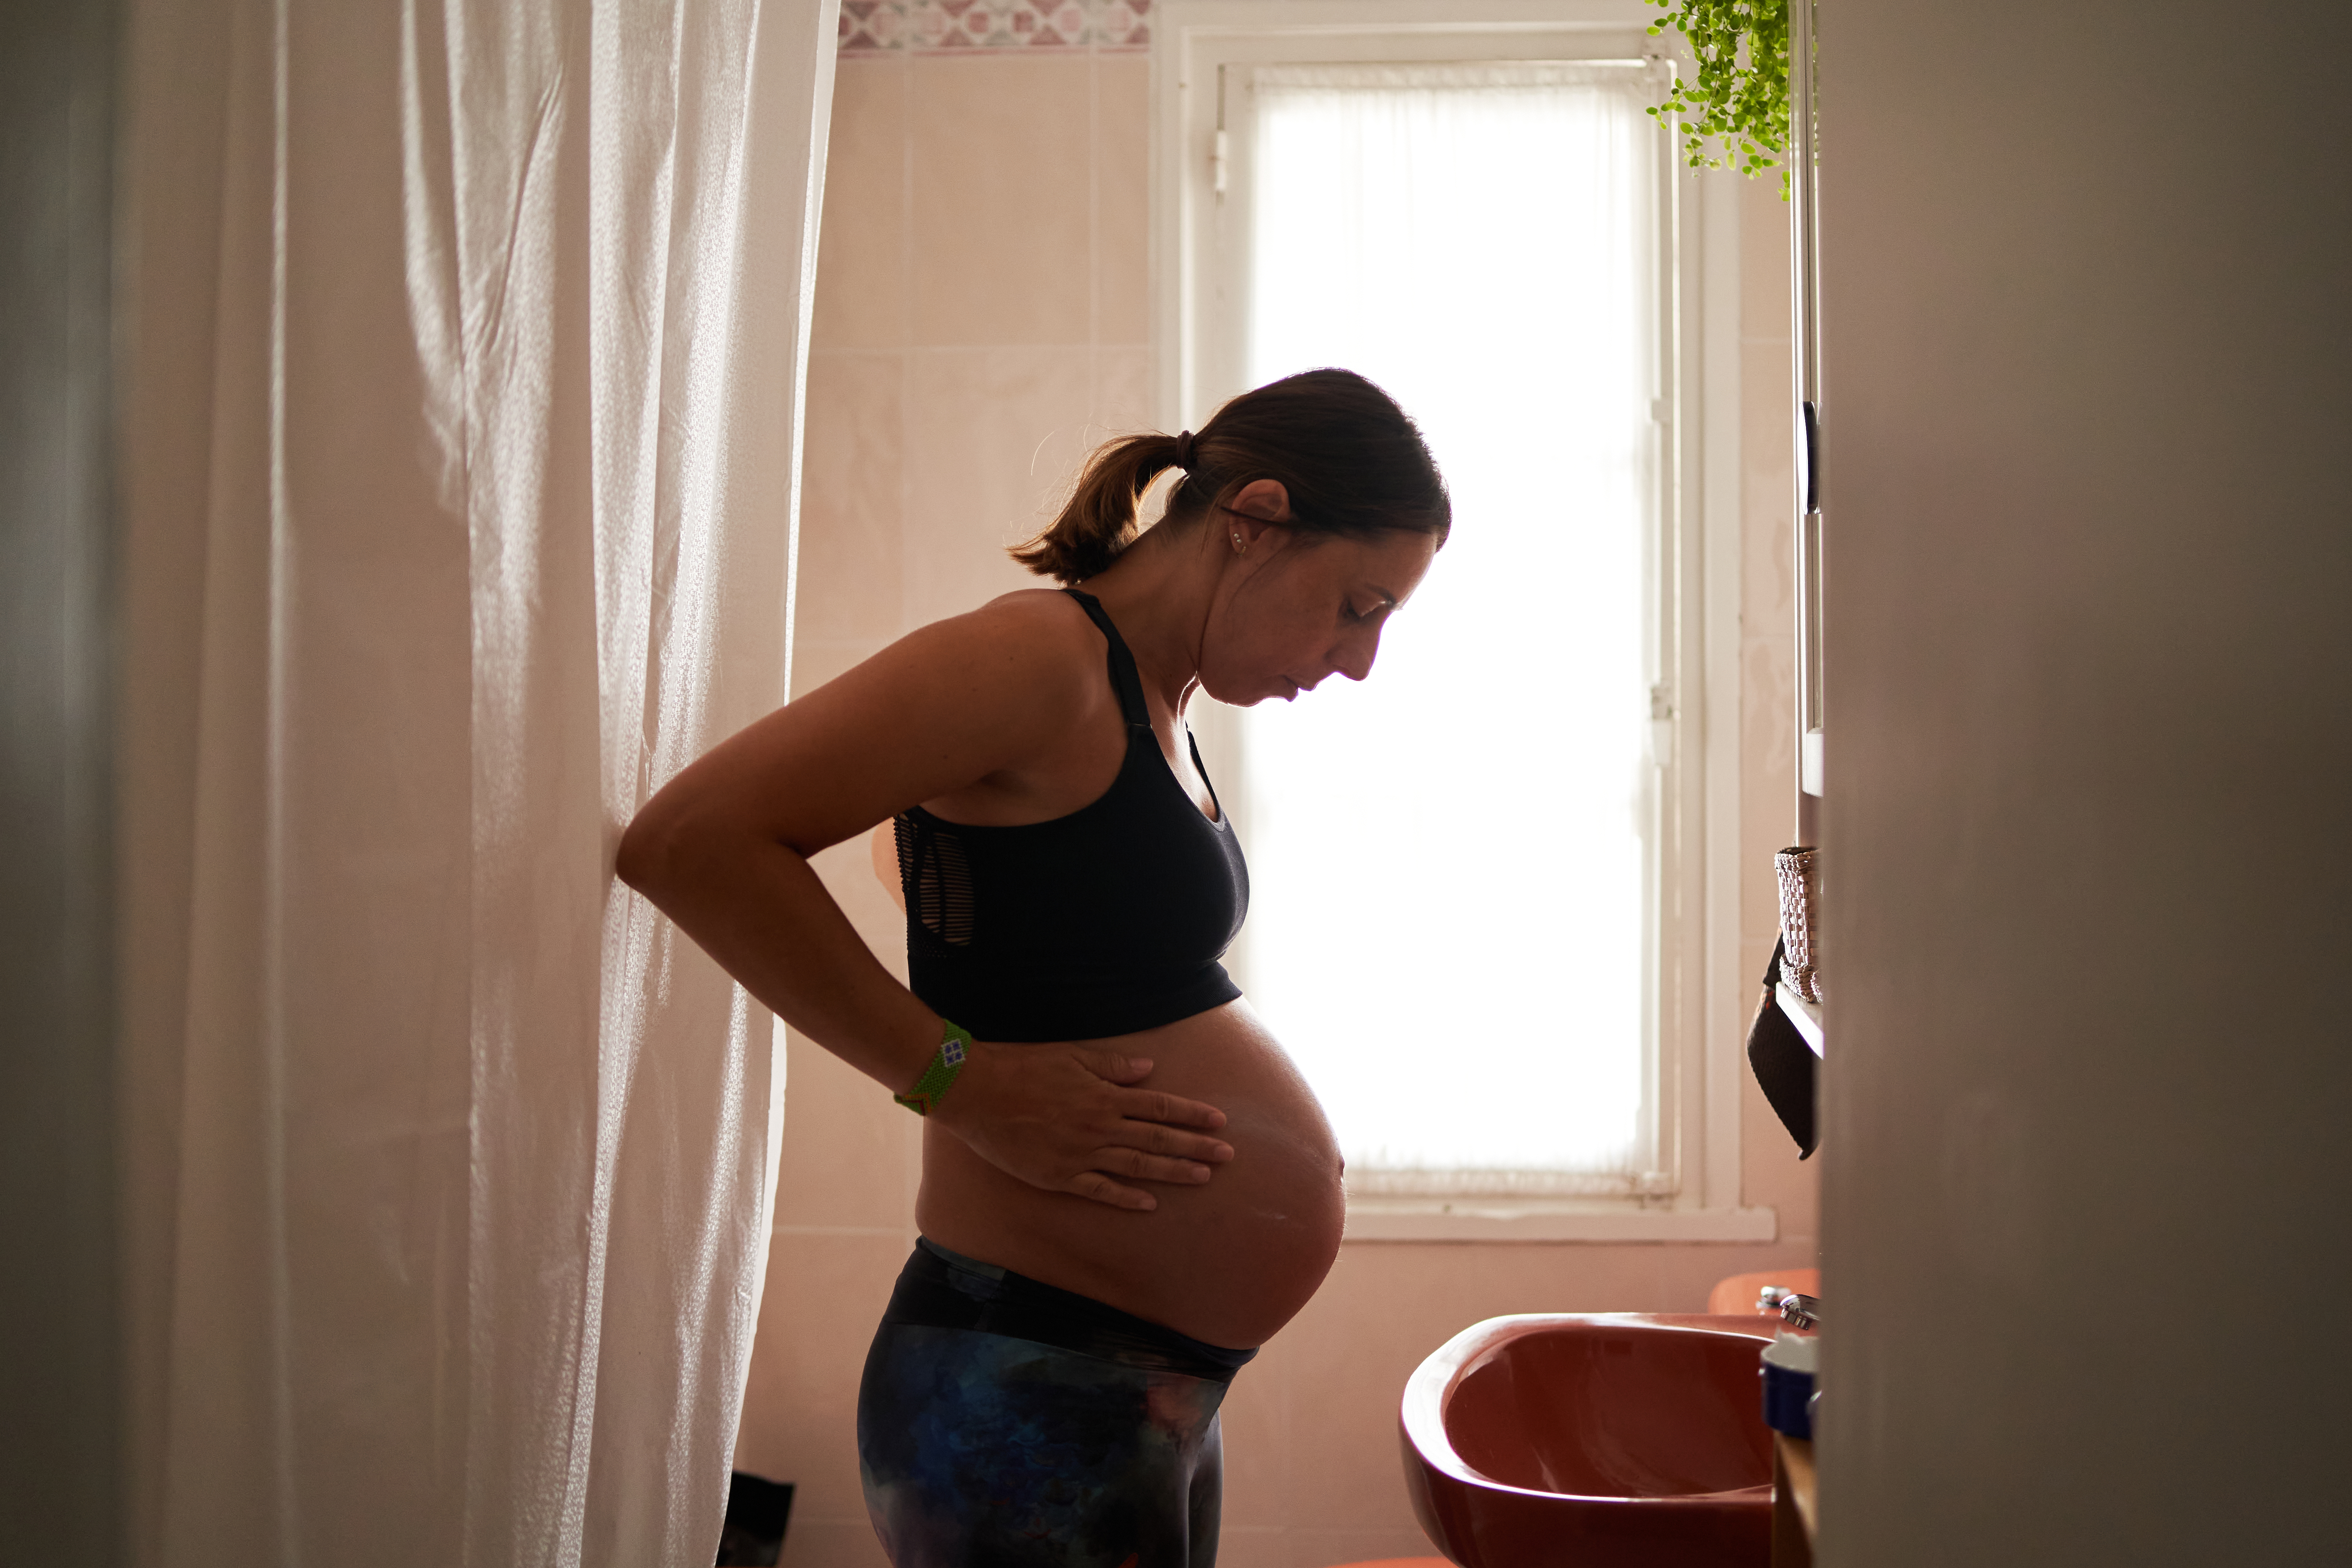 Side view of a pregnant woman moisturizing her belly | Source: Getty Images